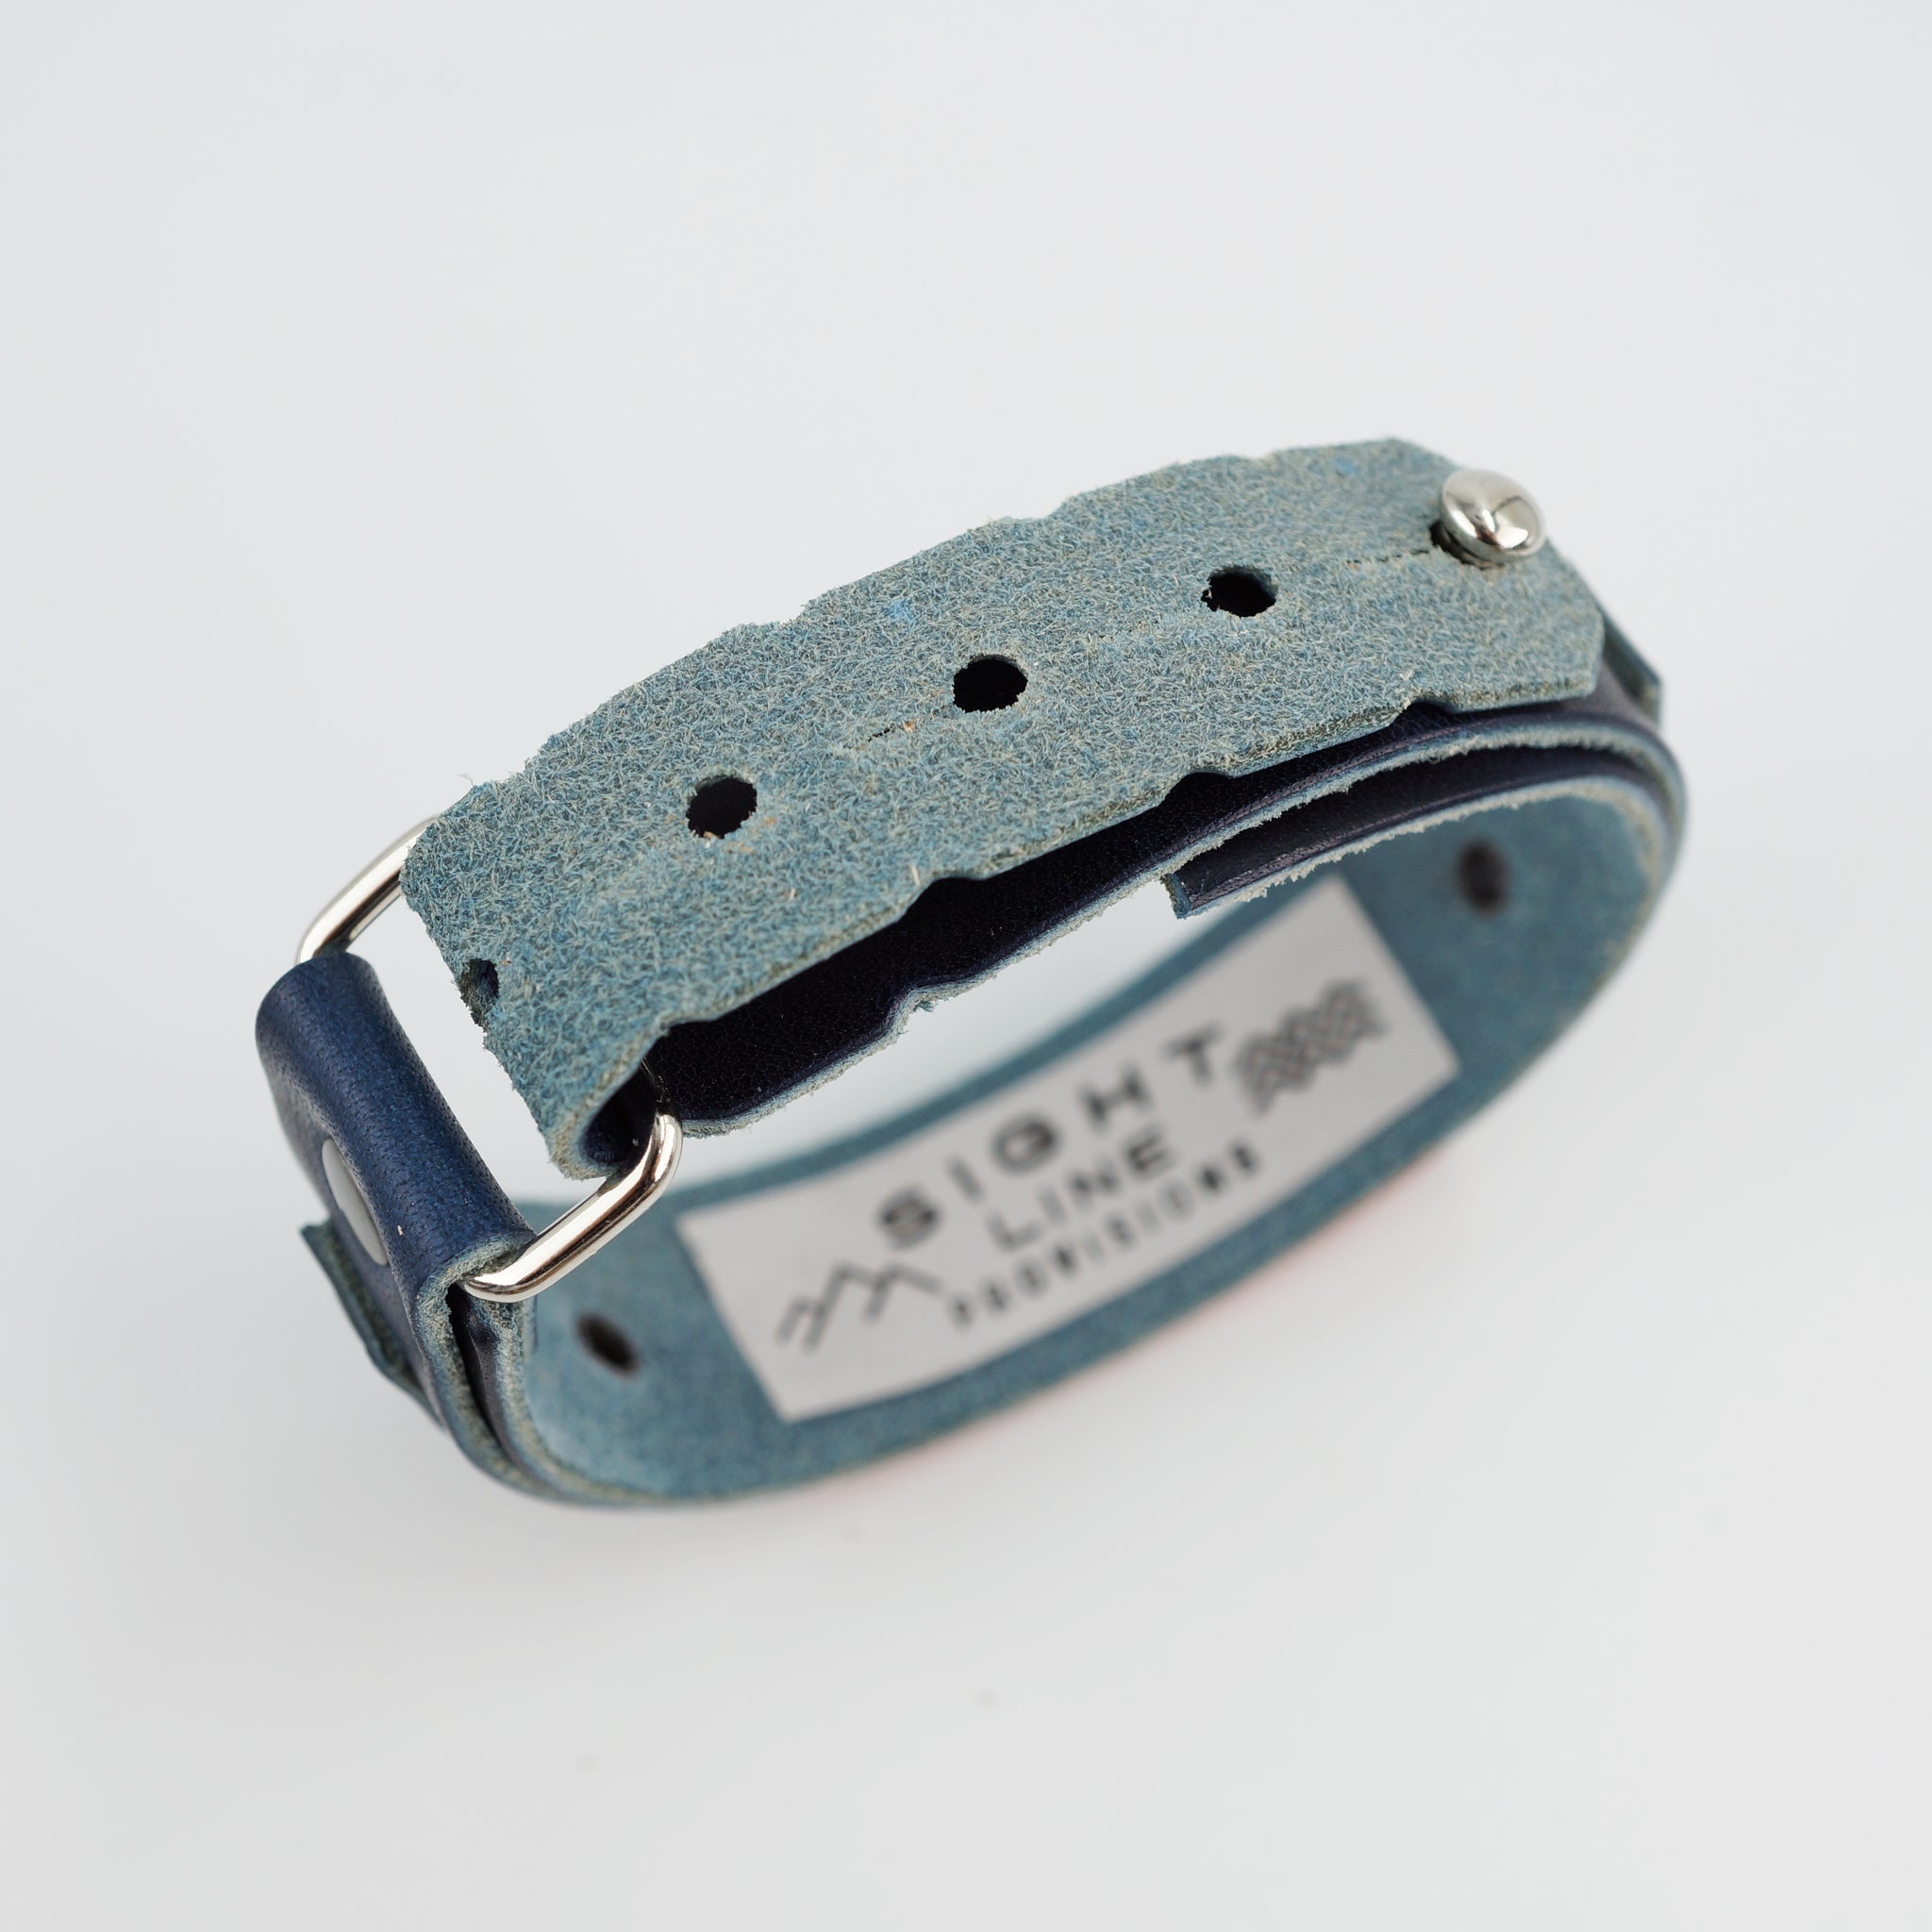 Sightline Provisions Bracelet - Steely Gray Trout 2.0